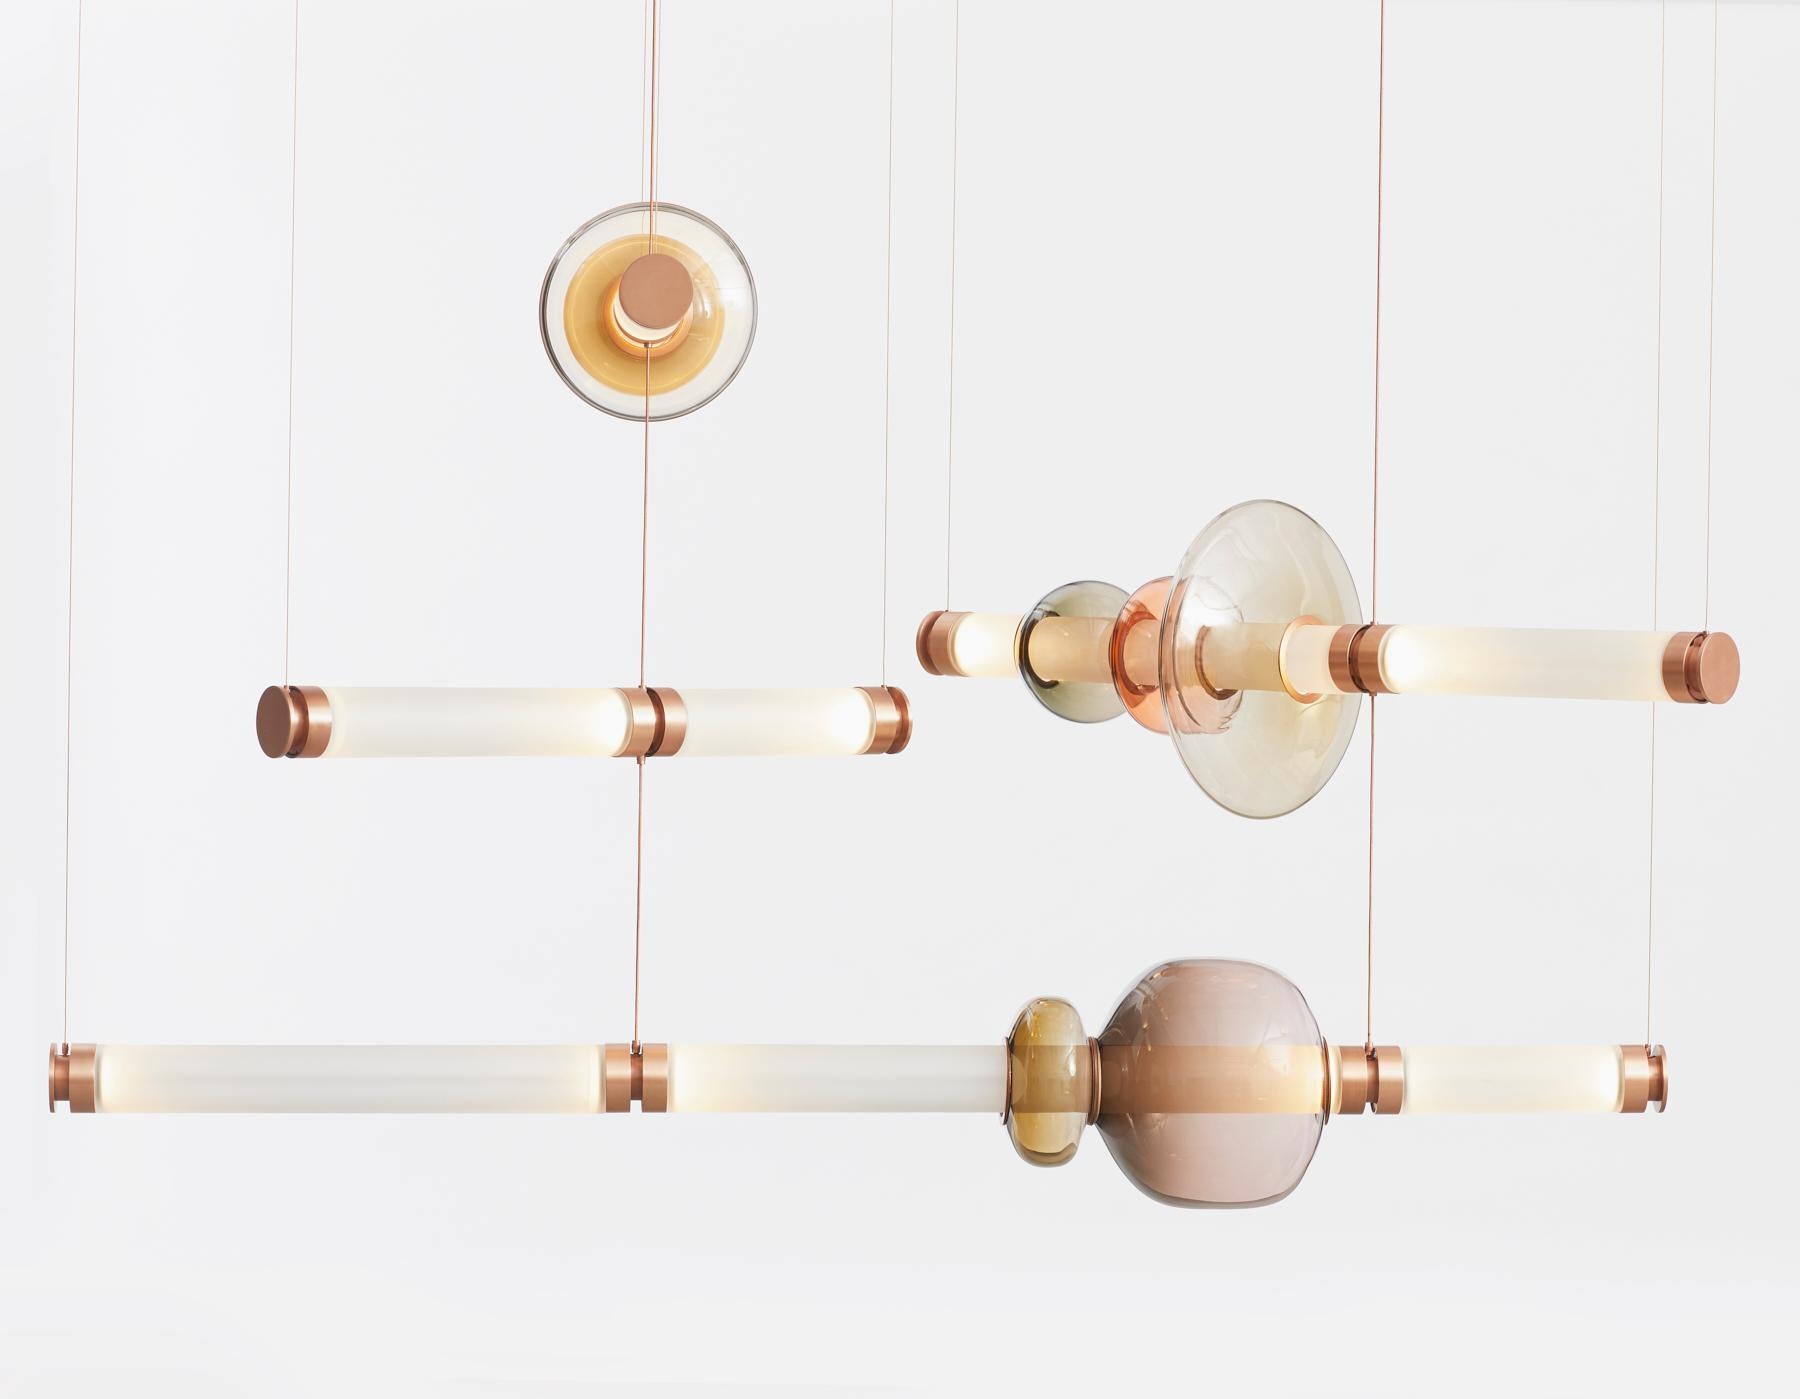 A lighting system with infinite interpretations, the Luna Chandelier 3 Tier  is a synergy of color, shape, and refracted light. Inspired by a lunar halo, the modular light fixture grows in every direction as its assembly system stems horizontally or